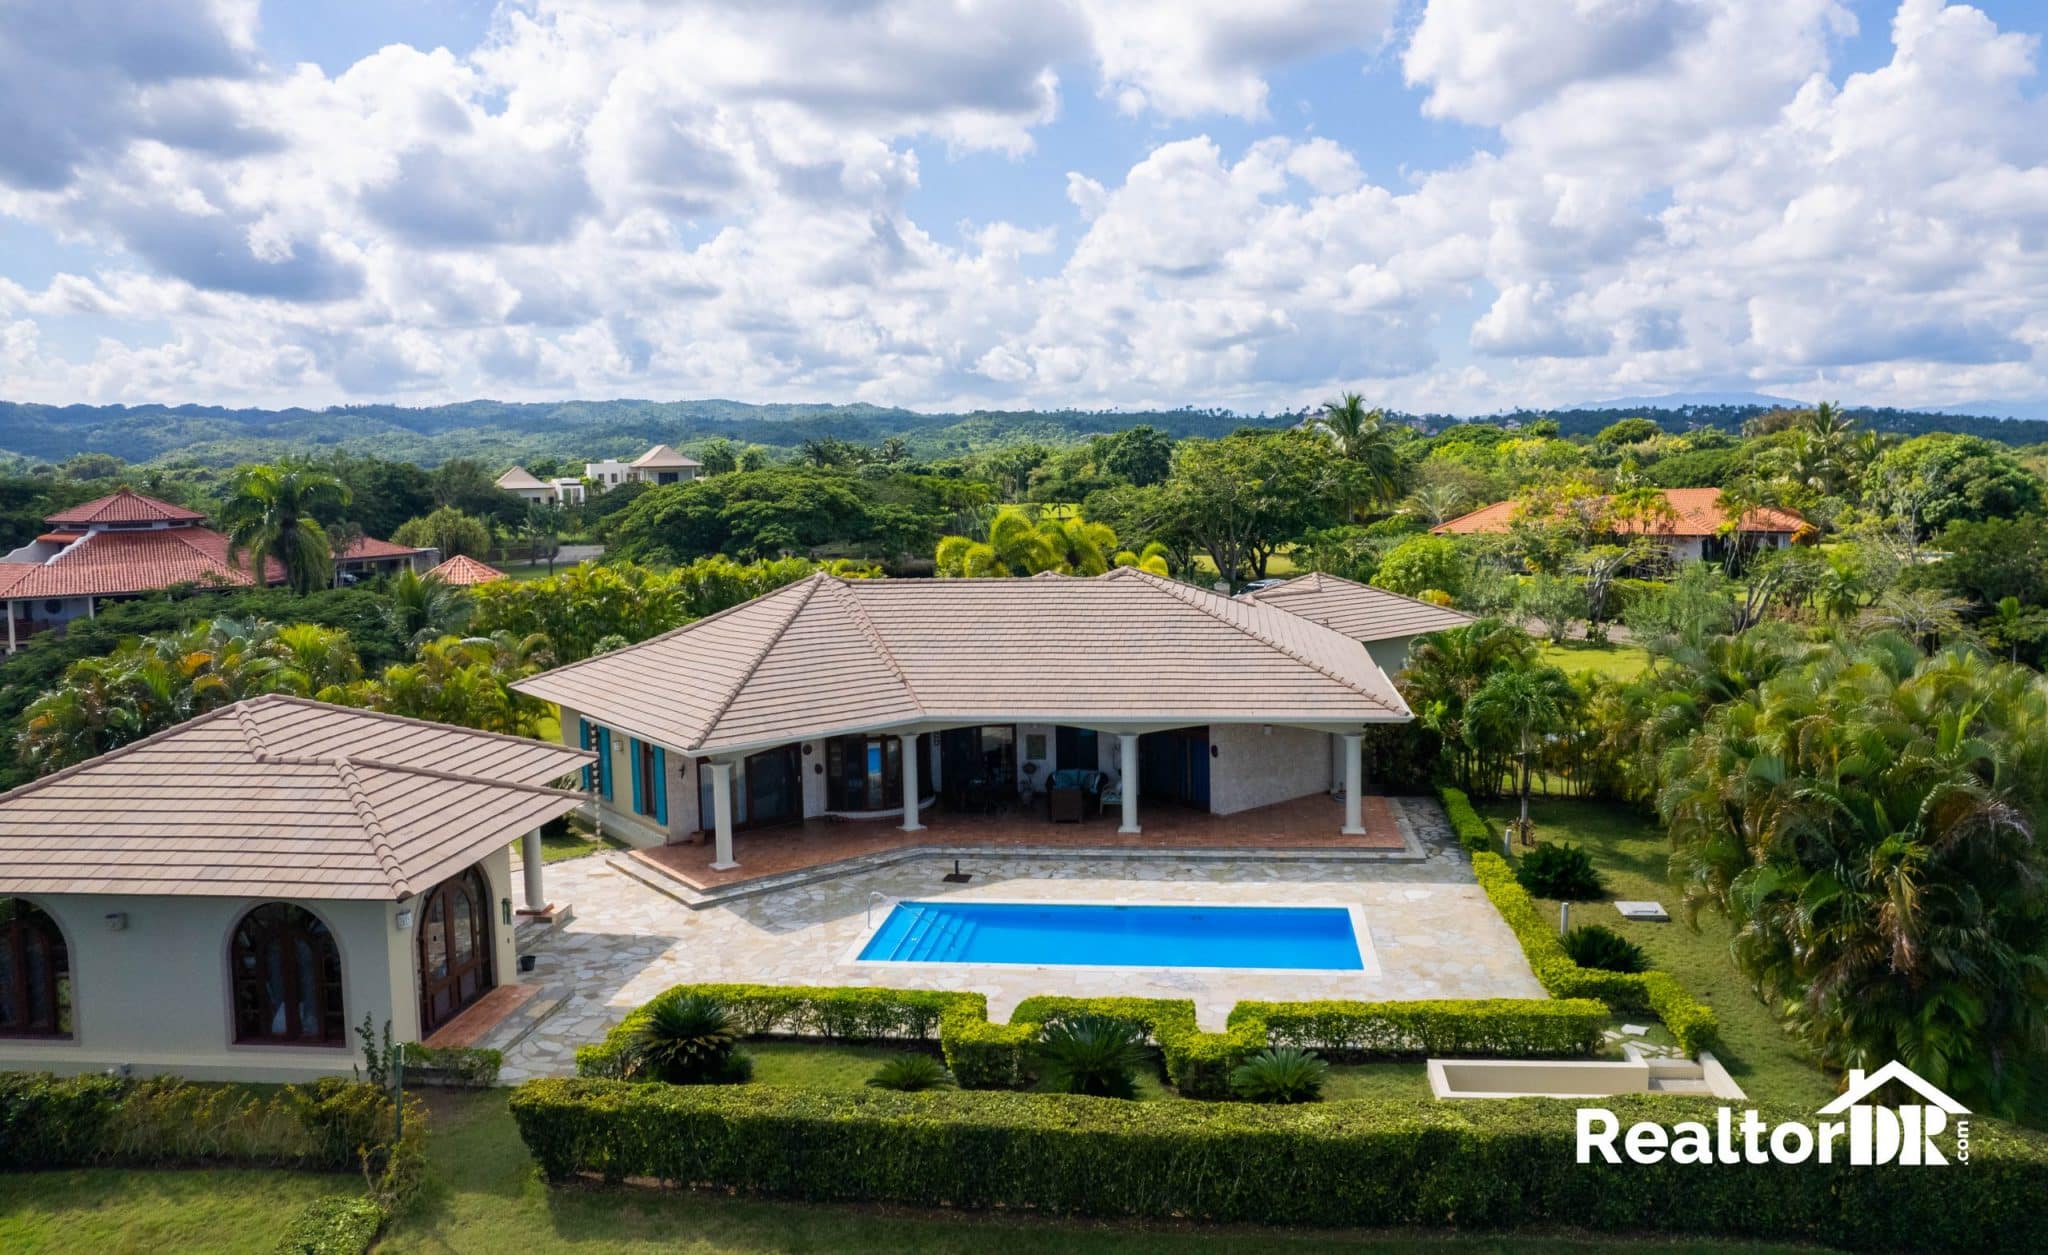 Ocean Breezes and Panoramic Views – Your Countryside Oasis in El Choco!